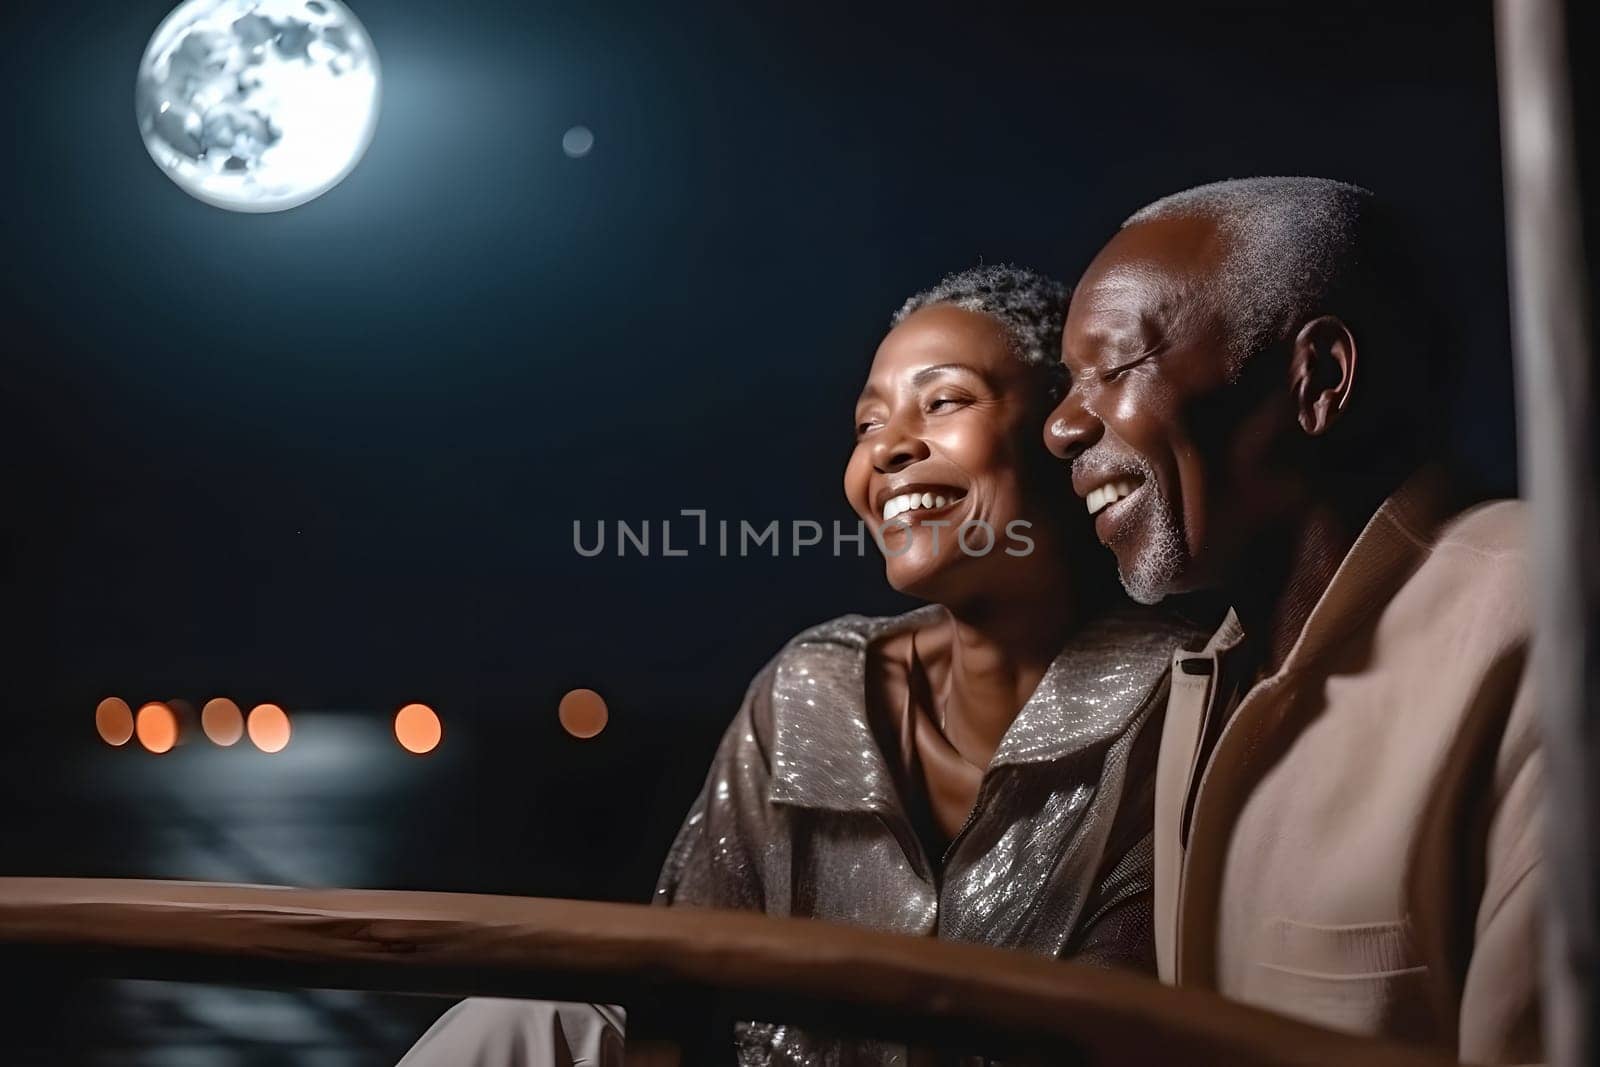 Beautiful and happy senior african american couple on a sailboat at night, neural network generated image by z1b